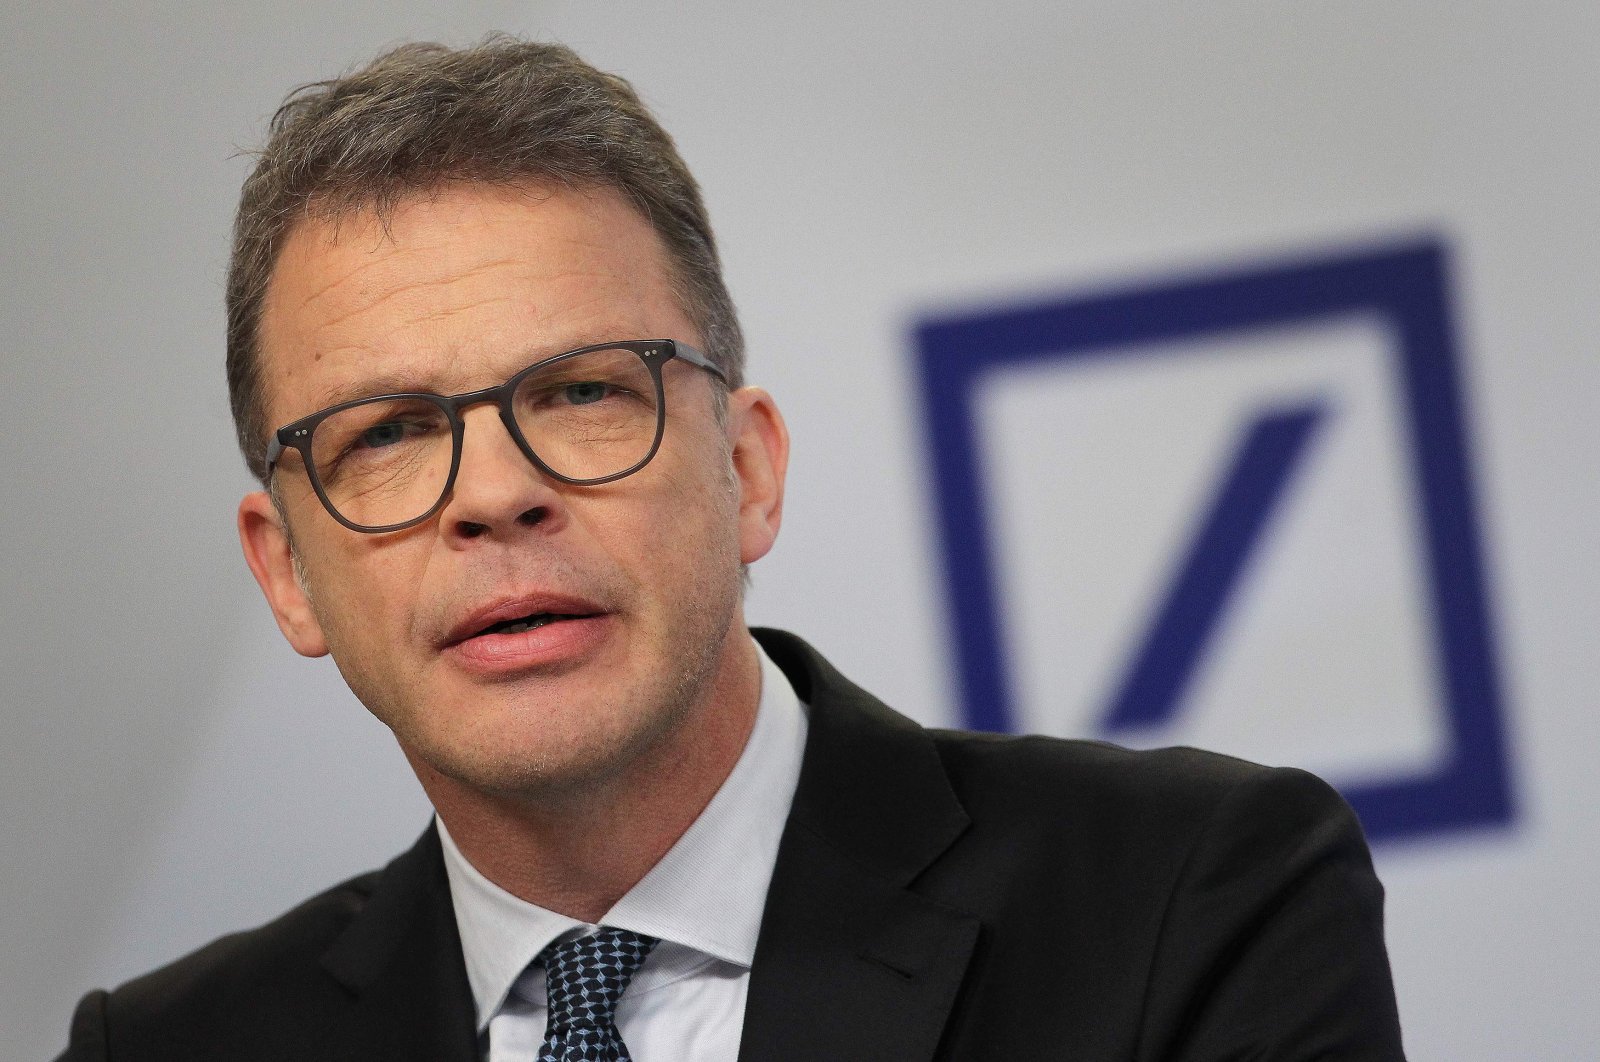 Christian Sewing, CEO of Deutsche Bank, addresses journalists at the group's headquarters in Frankfurt am Main, western Germany, Jan. 30, 2020. (AFP Photo)